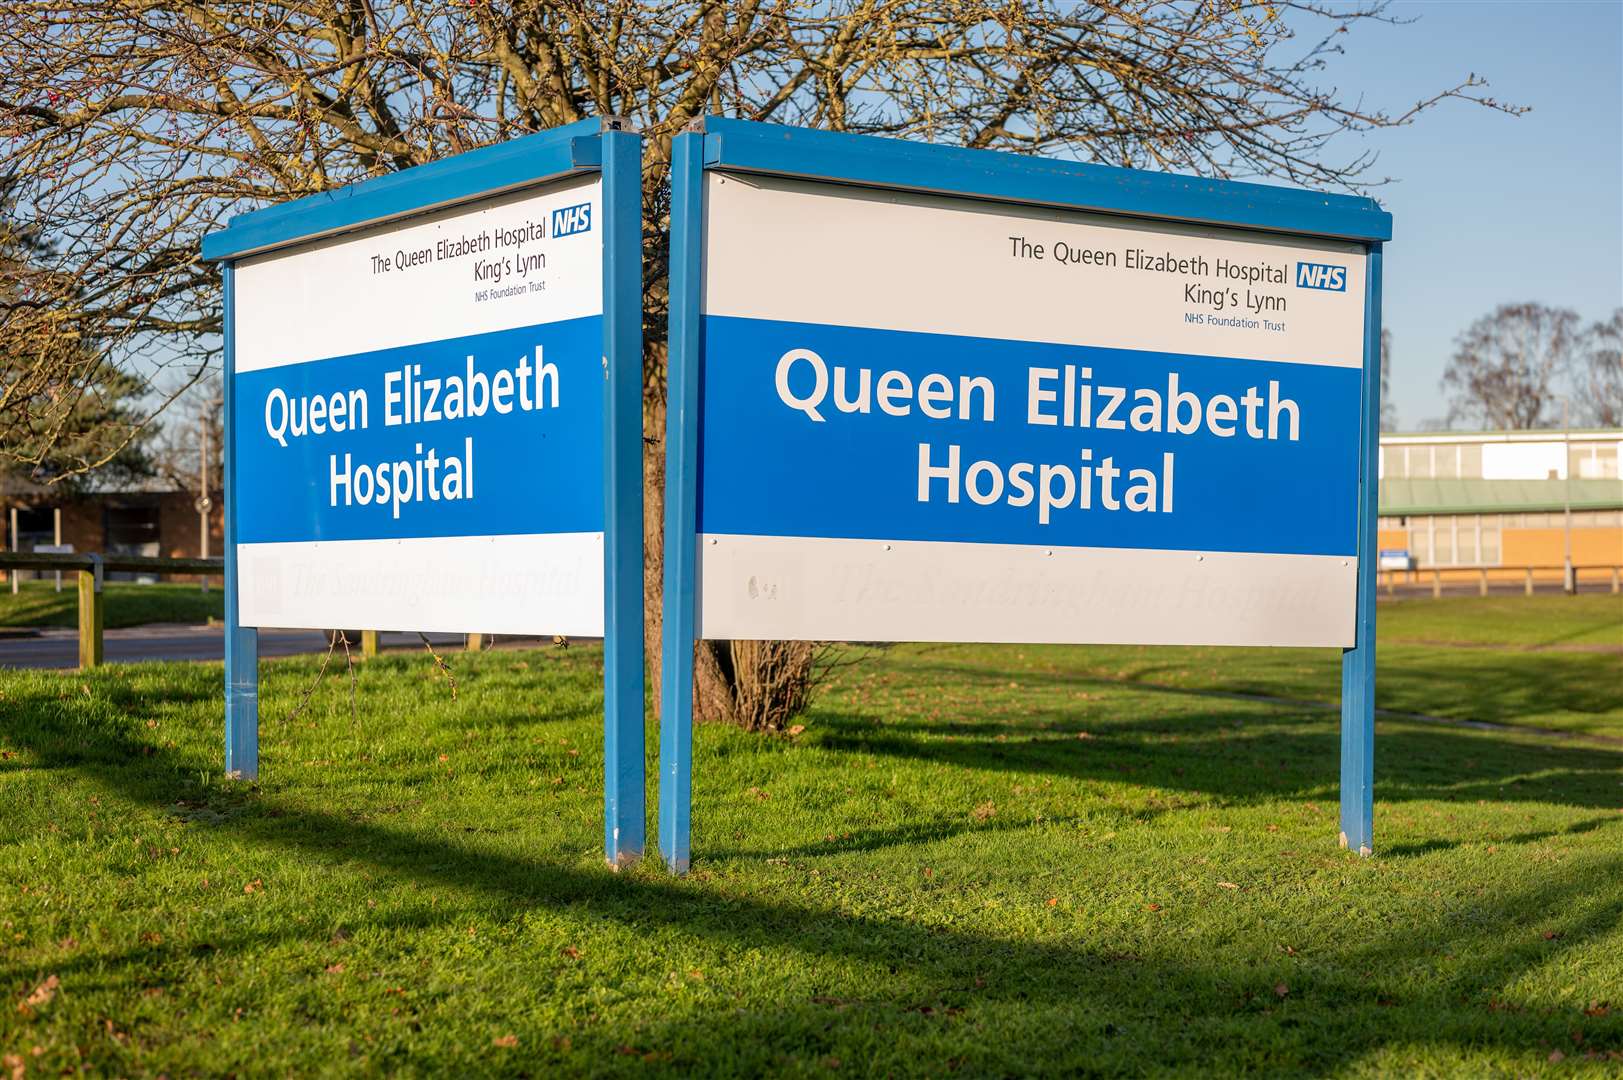 Campaigners have long been calling for a rebuild of Lynn's Queen Elizabeth Hospital